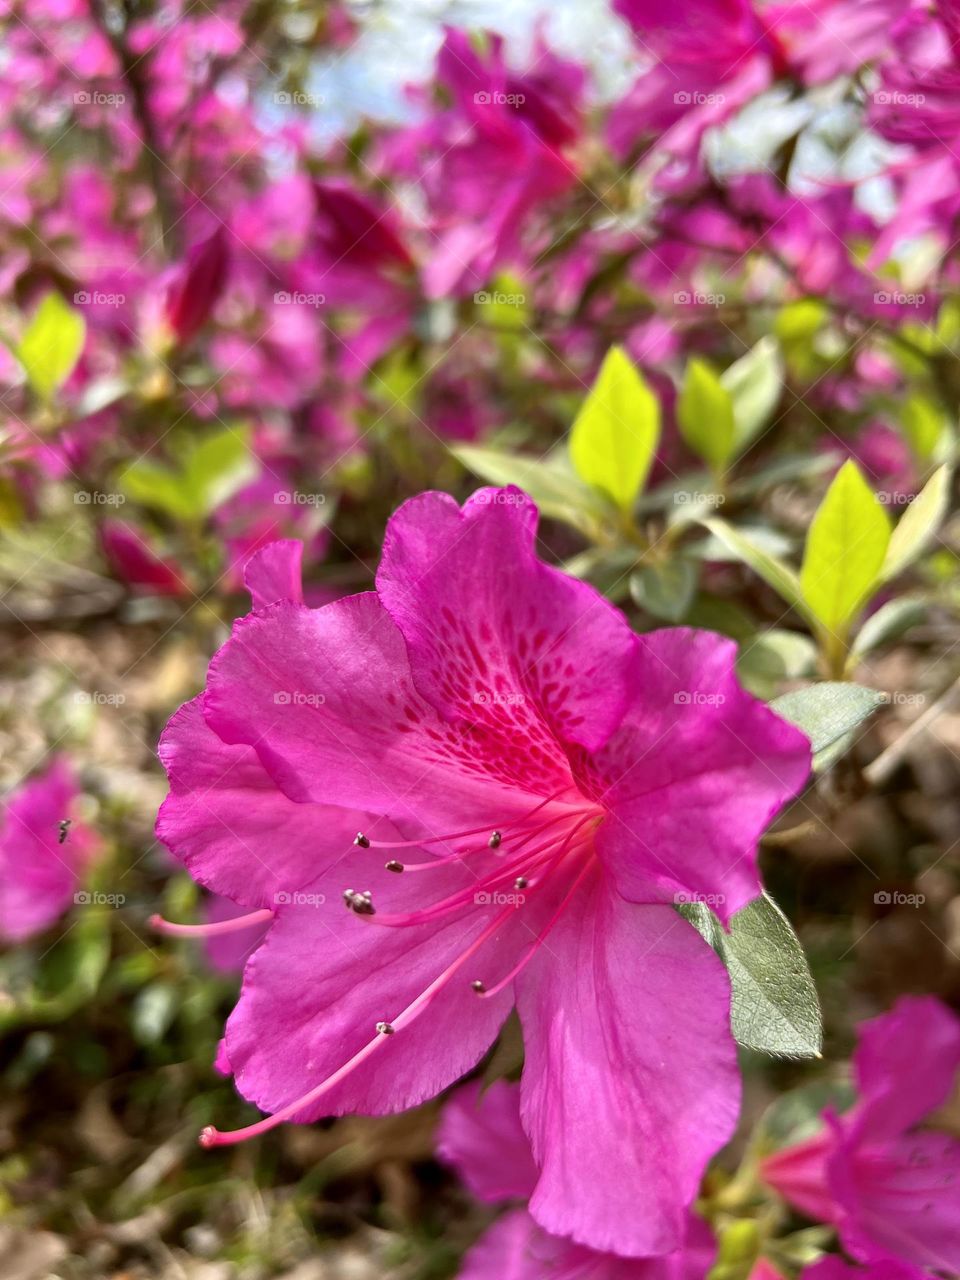 Spring azalea bloom in vibrant pink. Closeup low angle view on a sunny day.